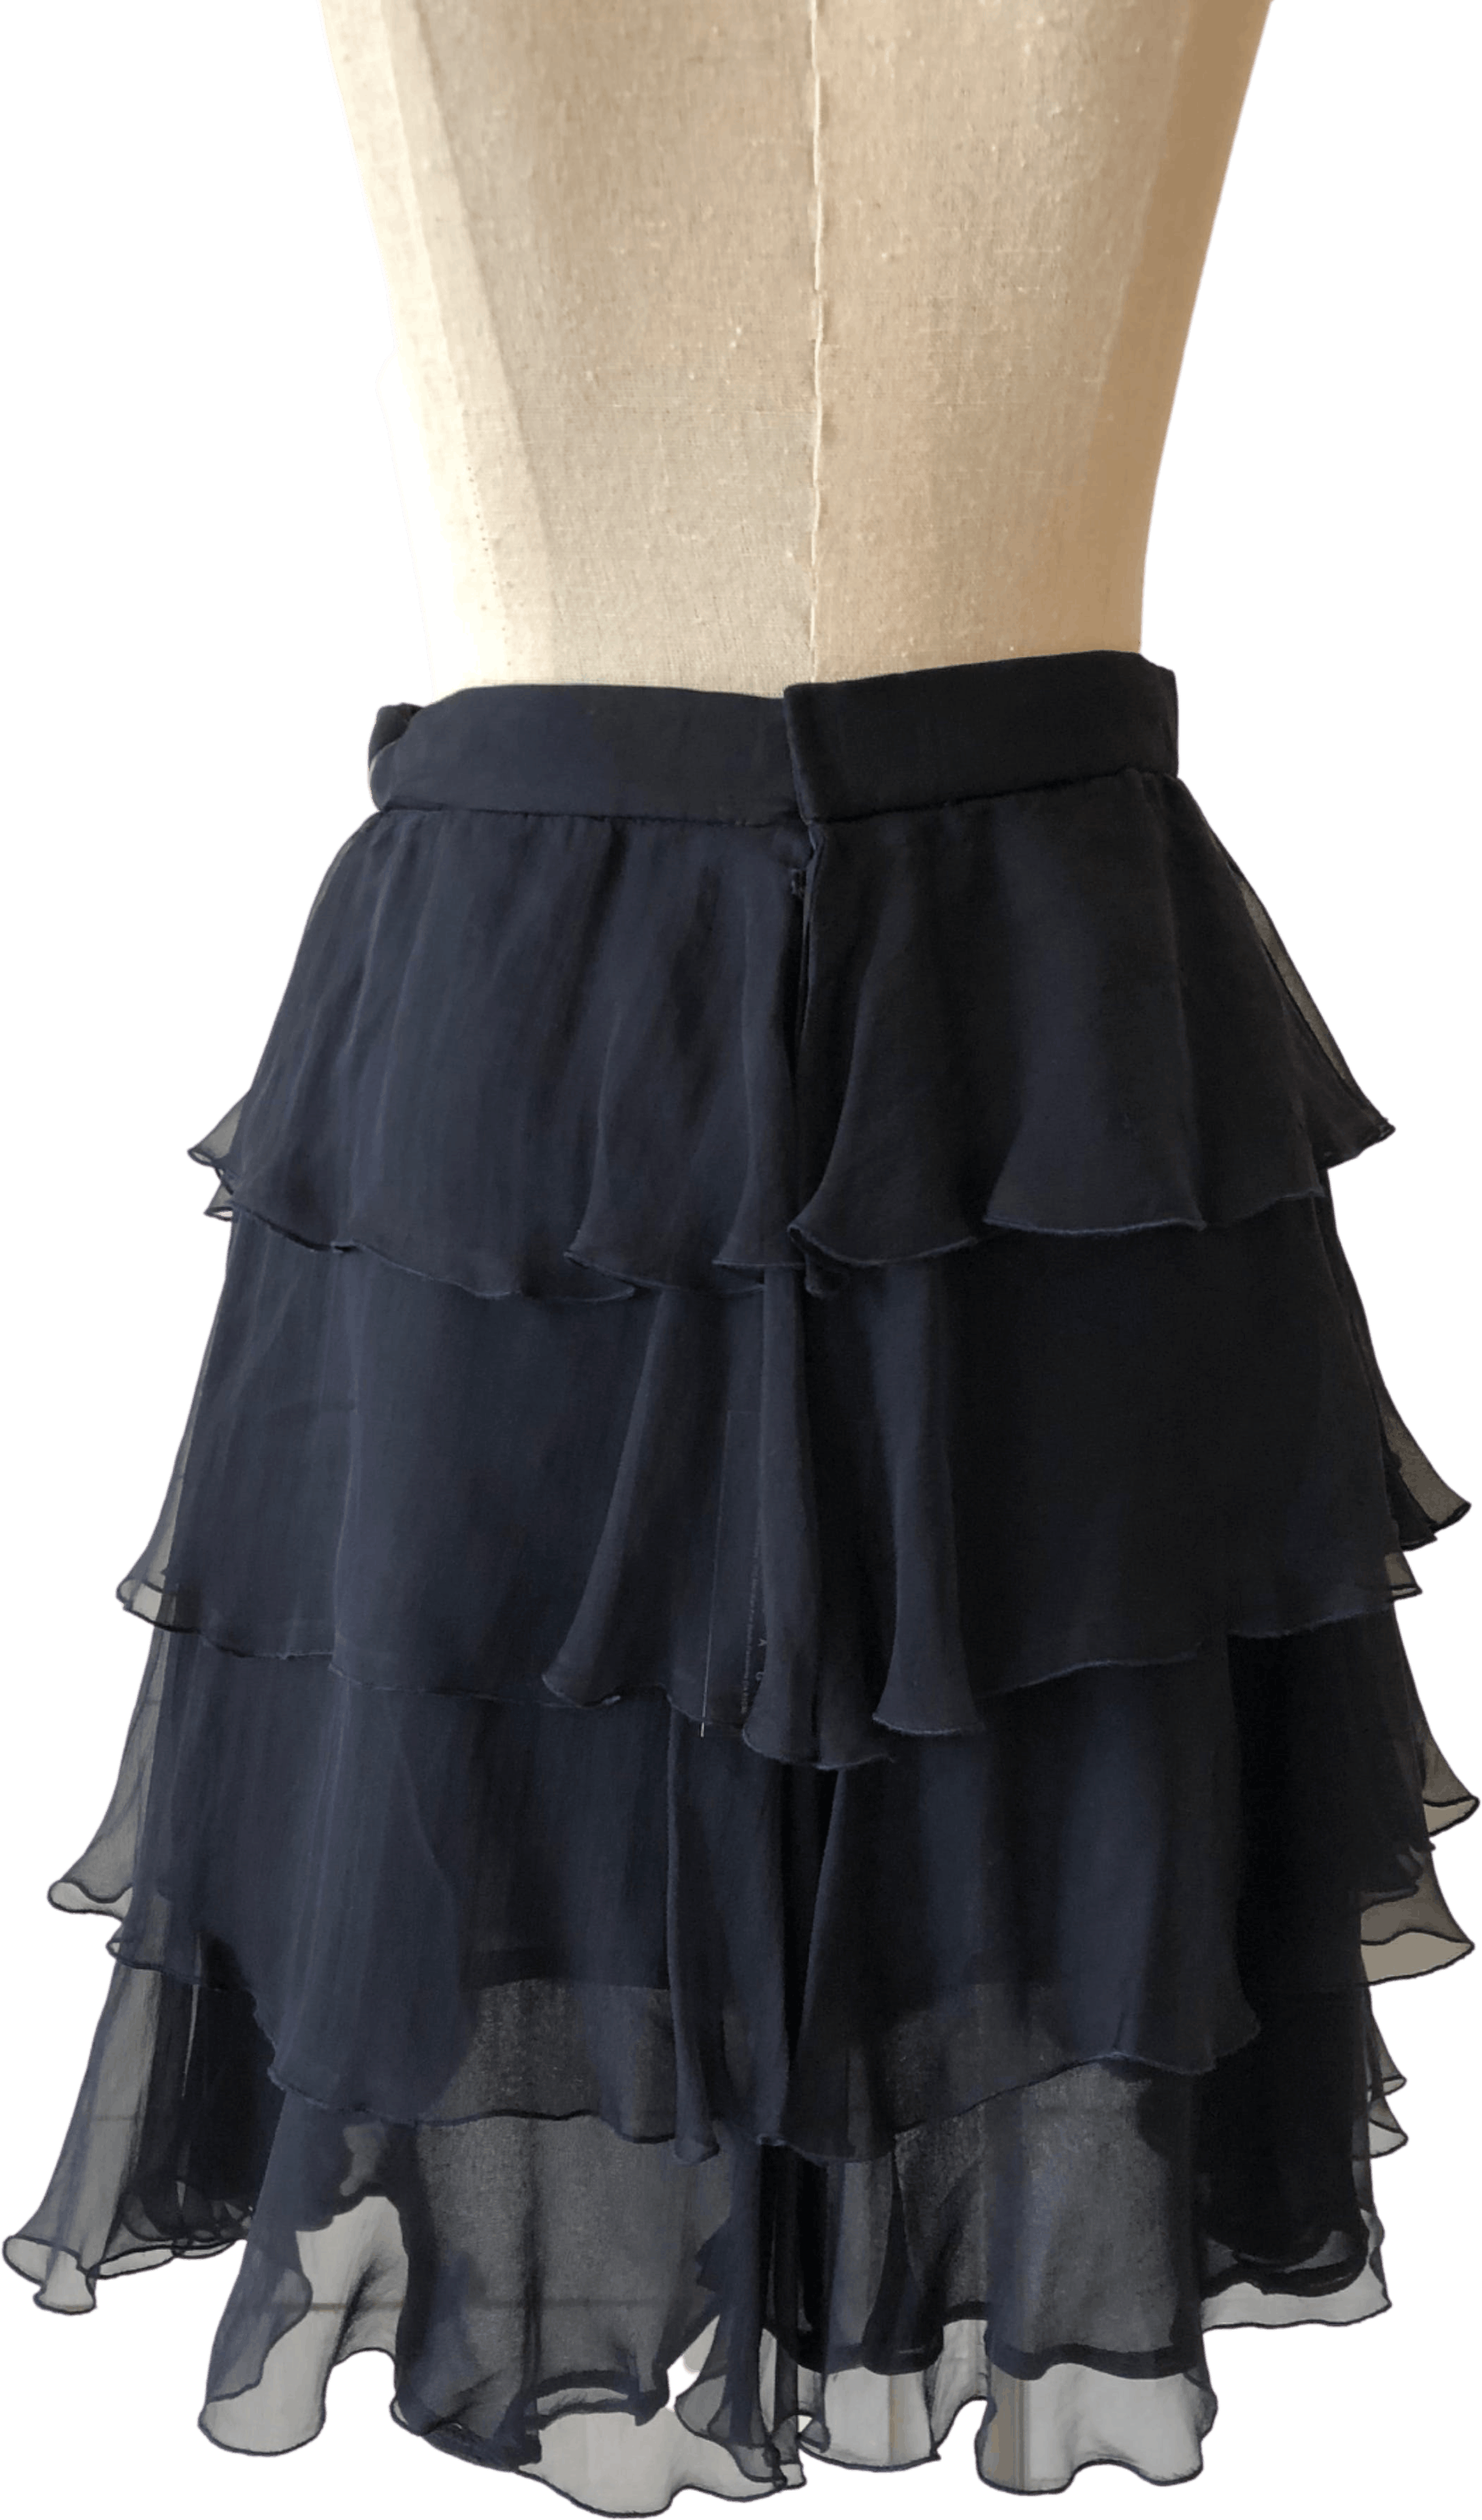 Vintage Black Sheer Ruffled Skirt with Lining by Valentino | Shop THRILLING